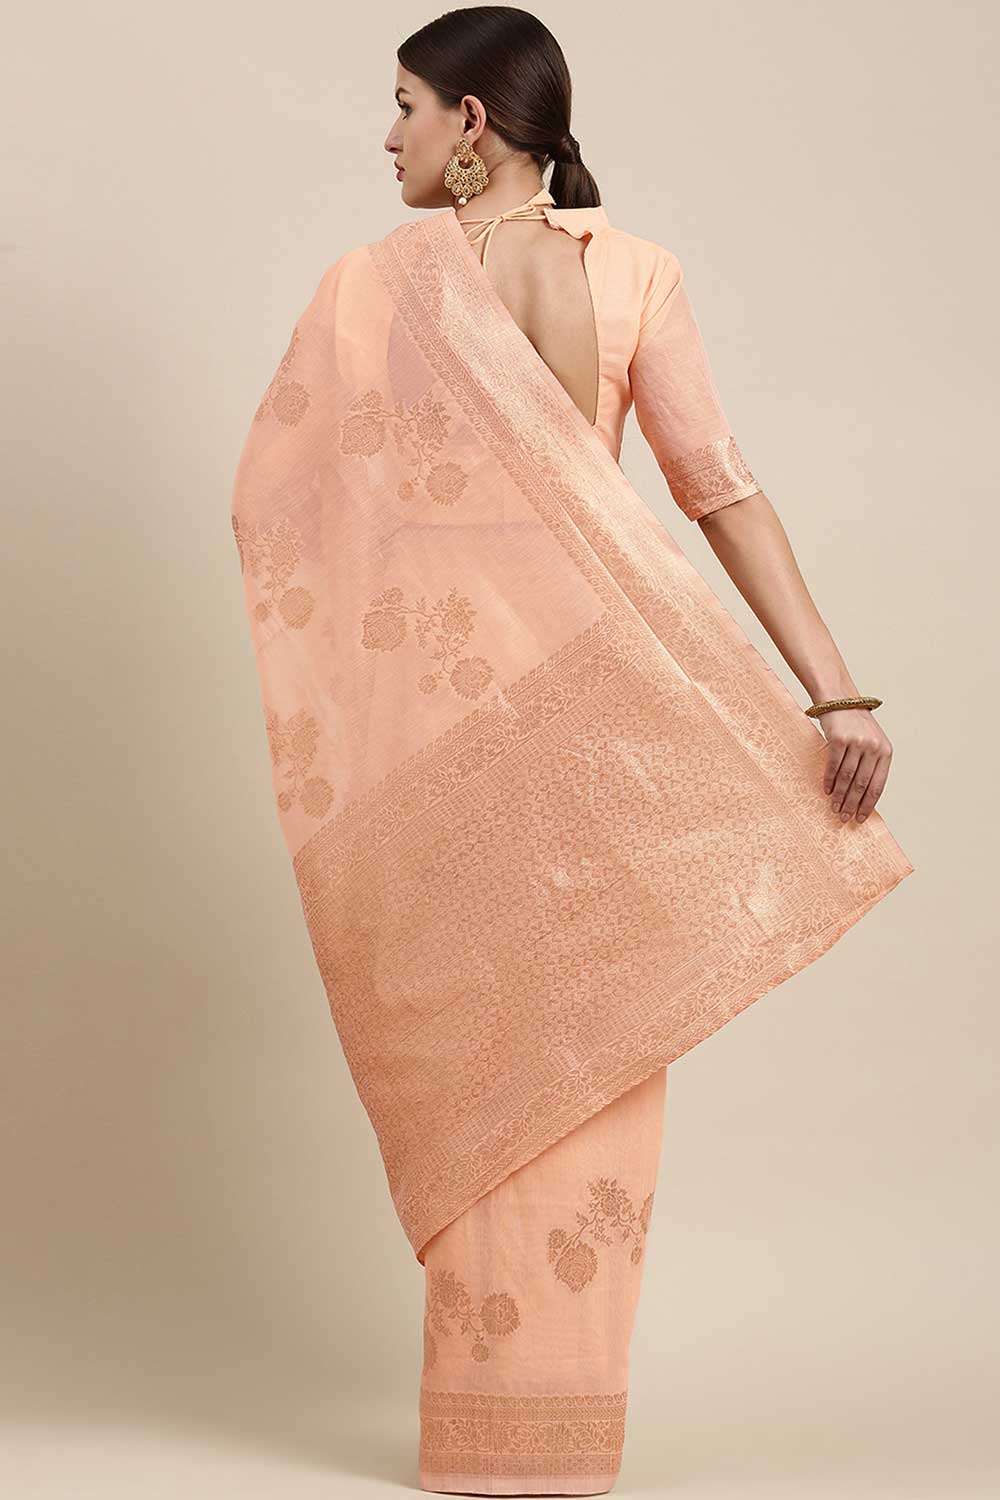 Shop Mirai Peach Floral Woven Blended Linen One Minute Saree at best offer at our  Store - One Minute Saree